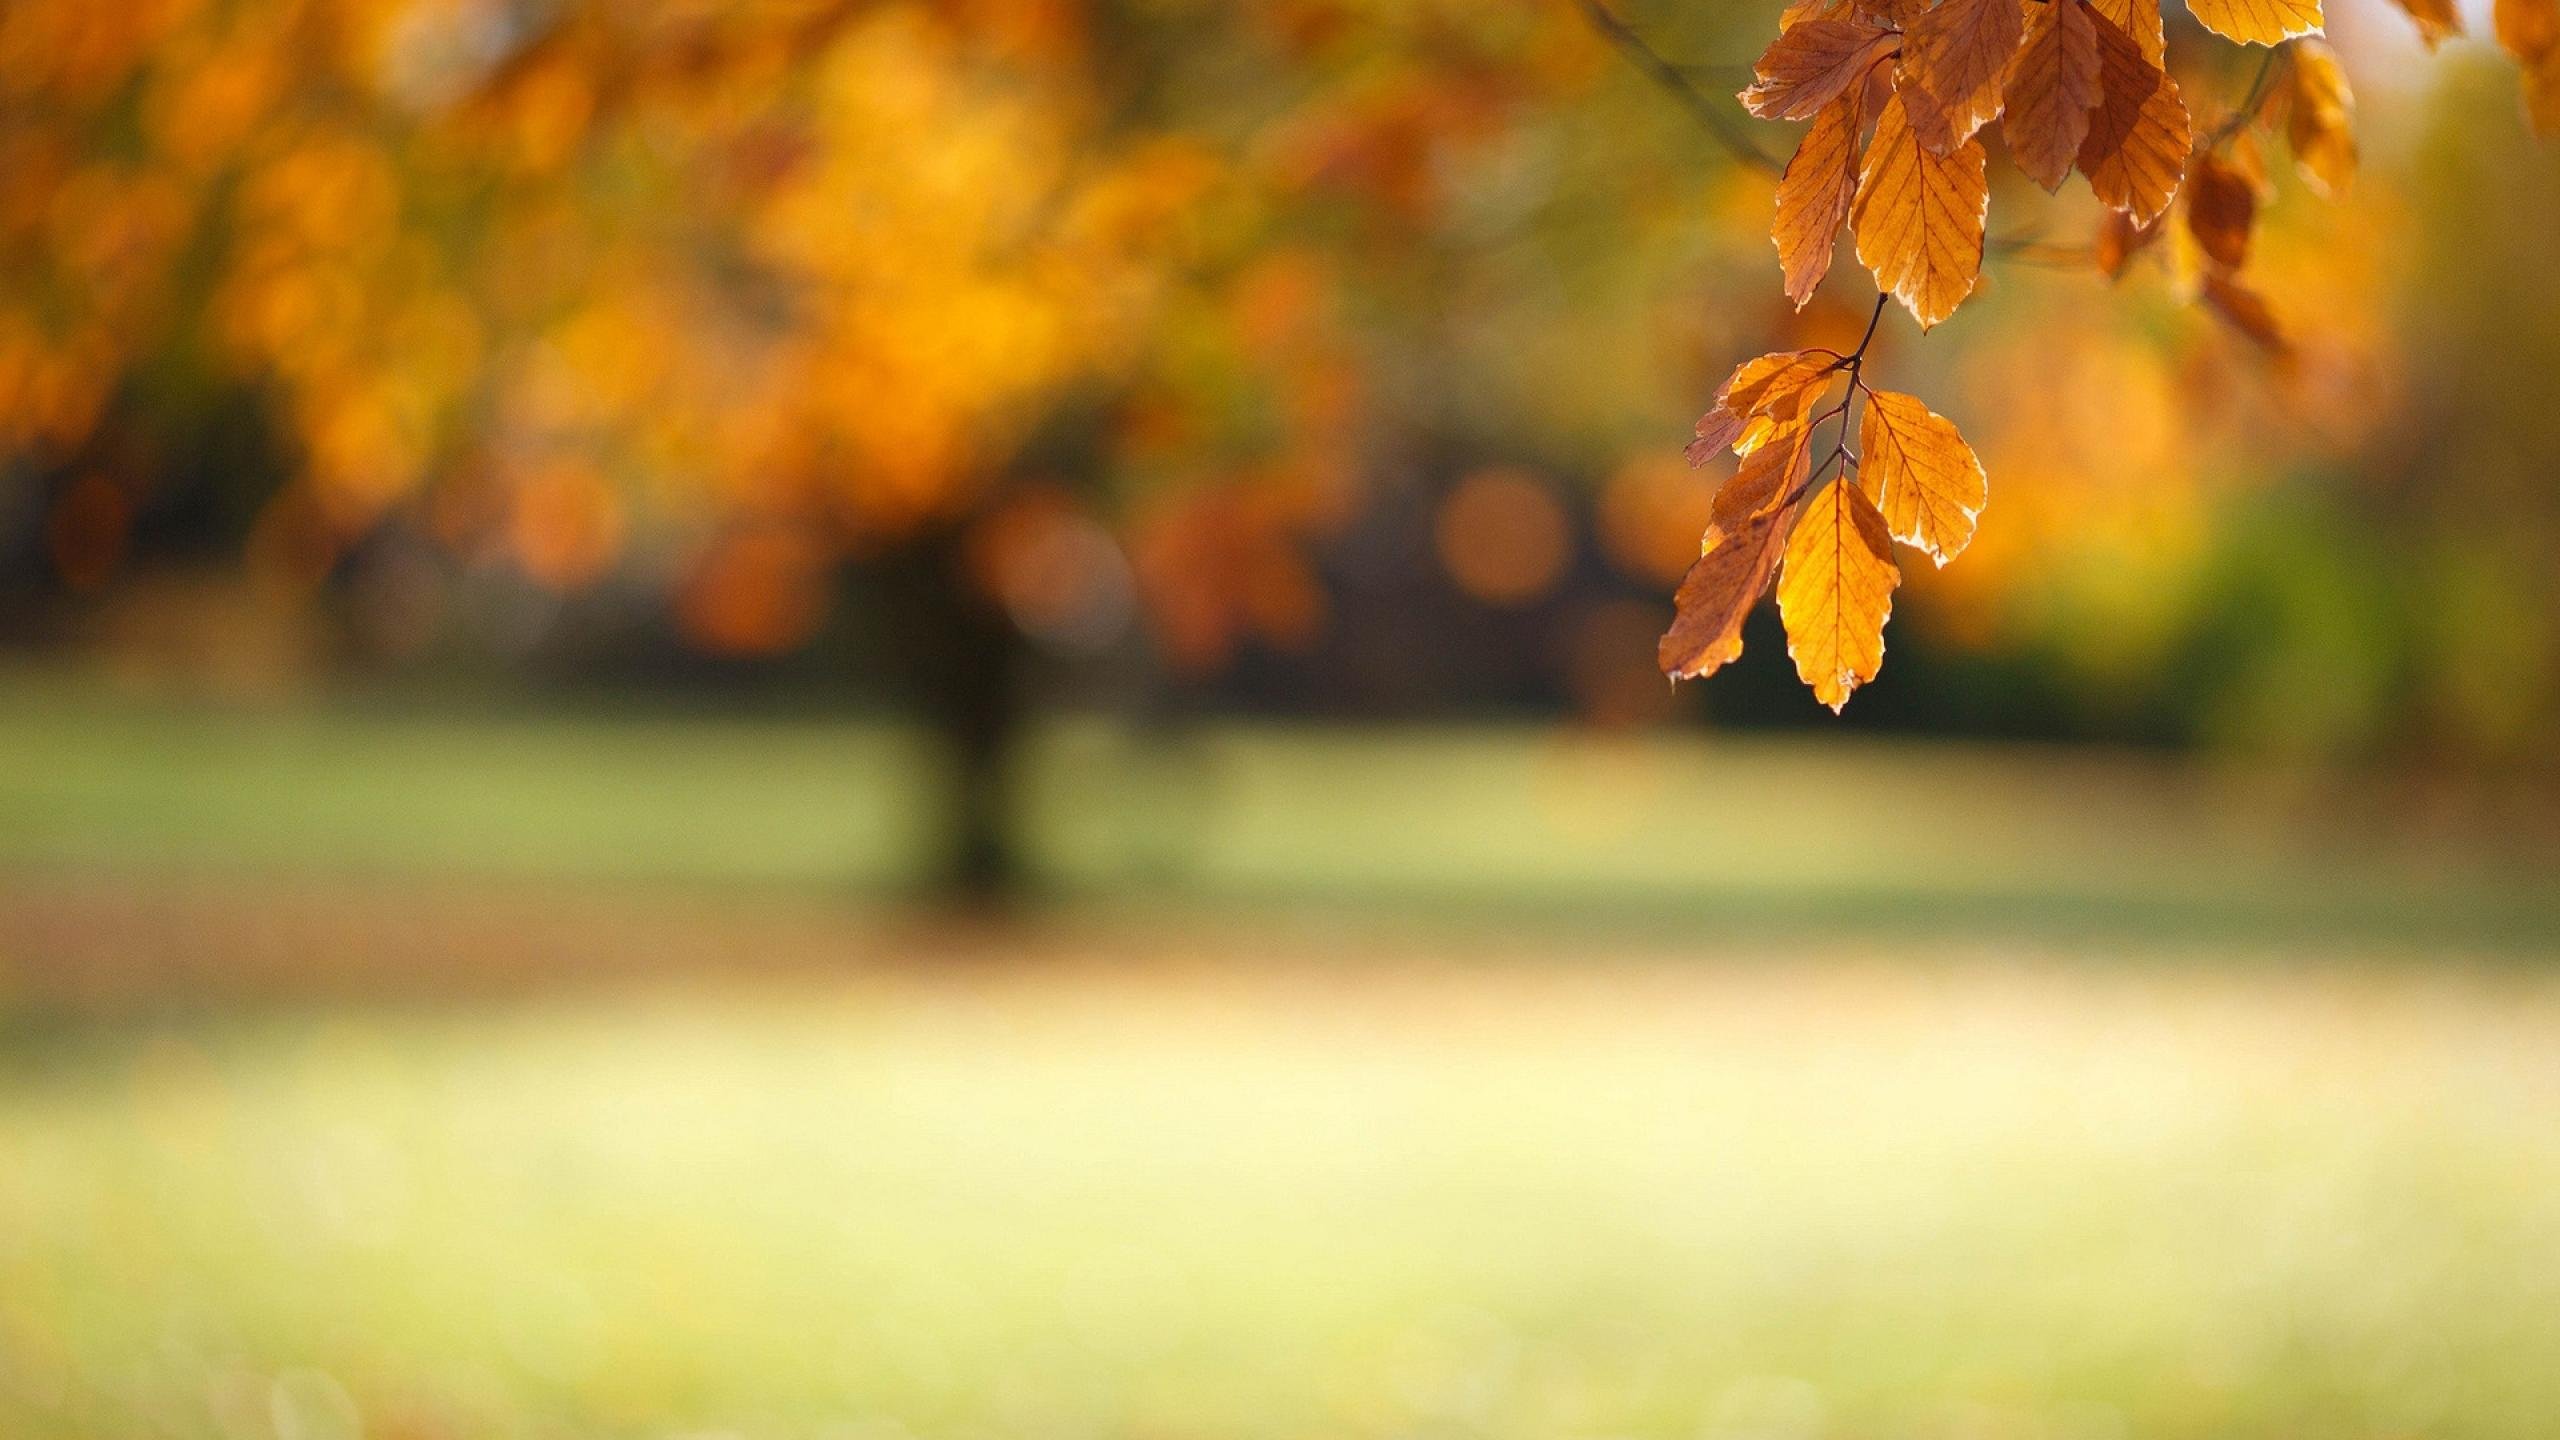 autumn, Fall, Tree, Forest, Landscape, Nature, Leaves Wallpaper